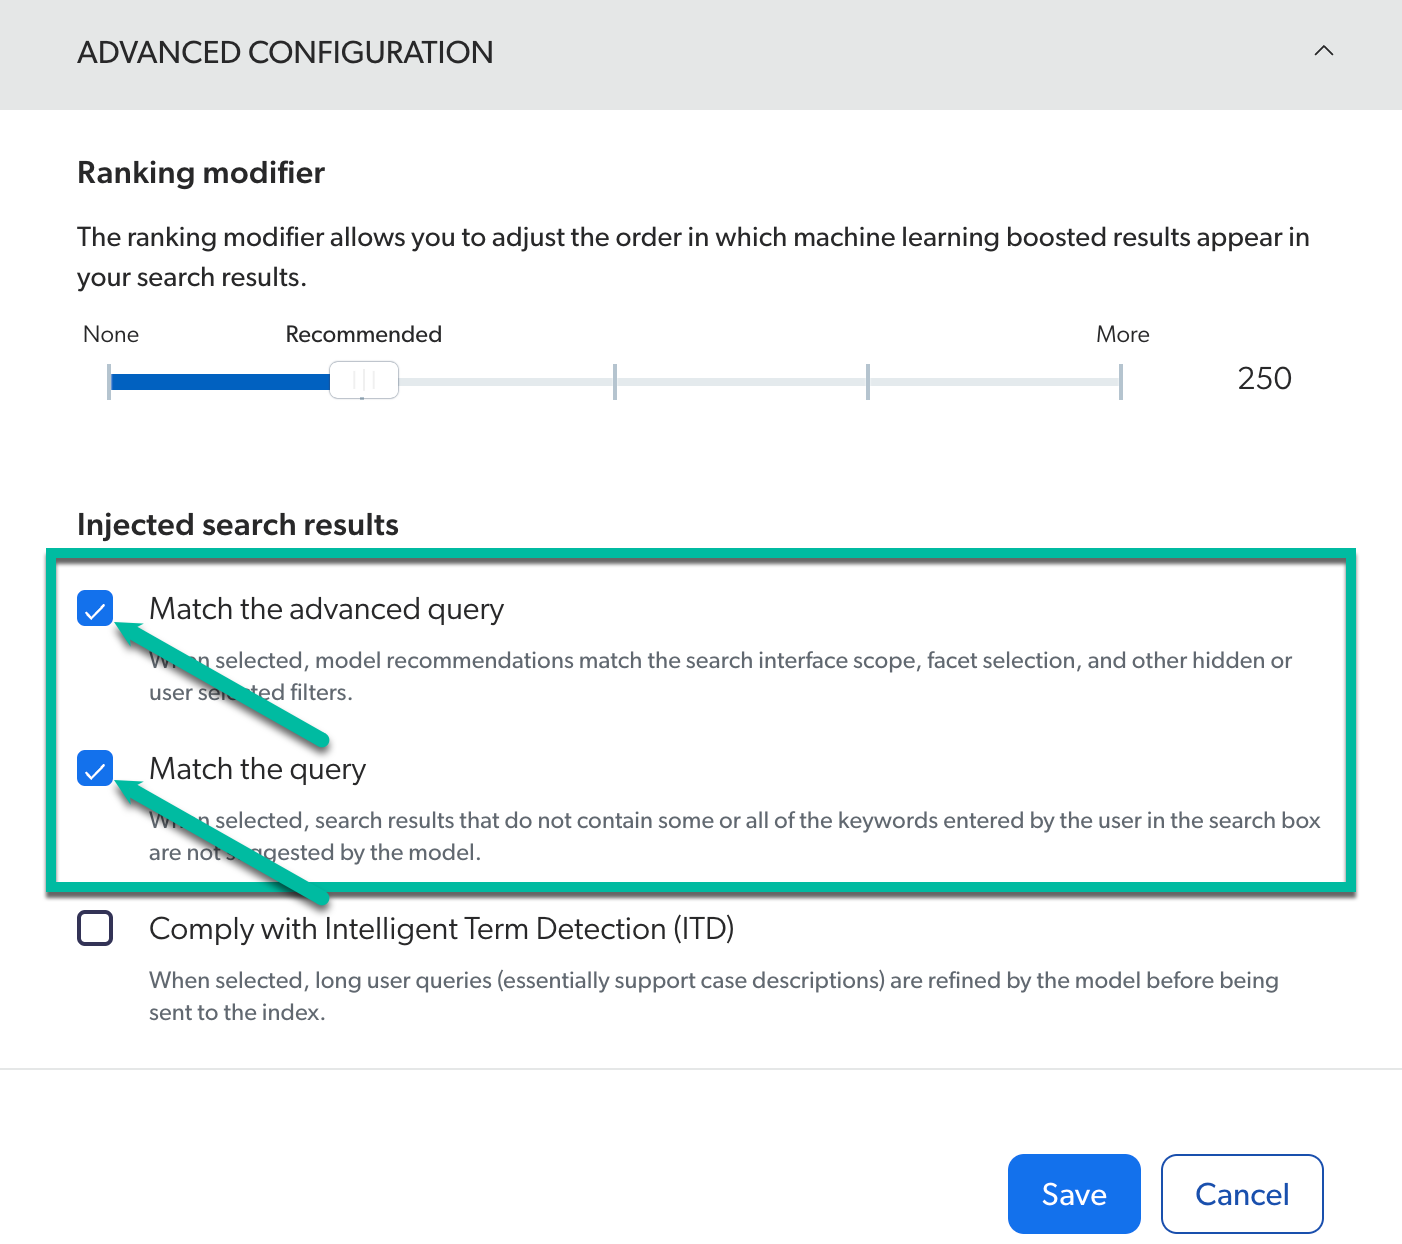 enable Match the query and Match the advanced query options